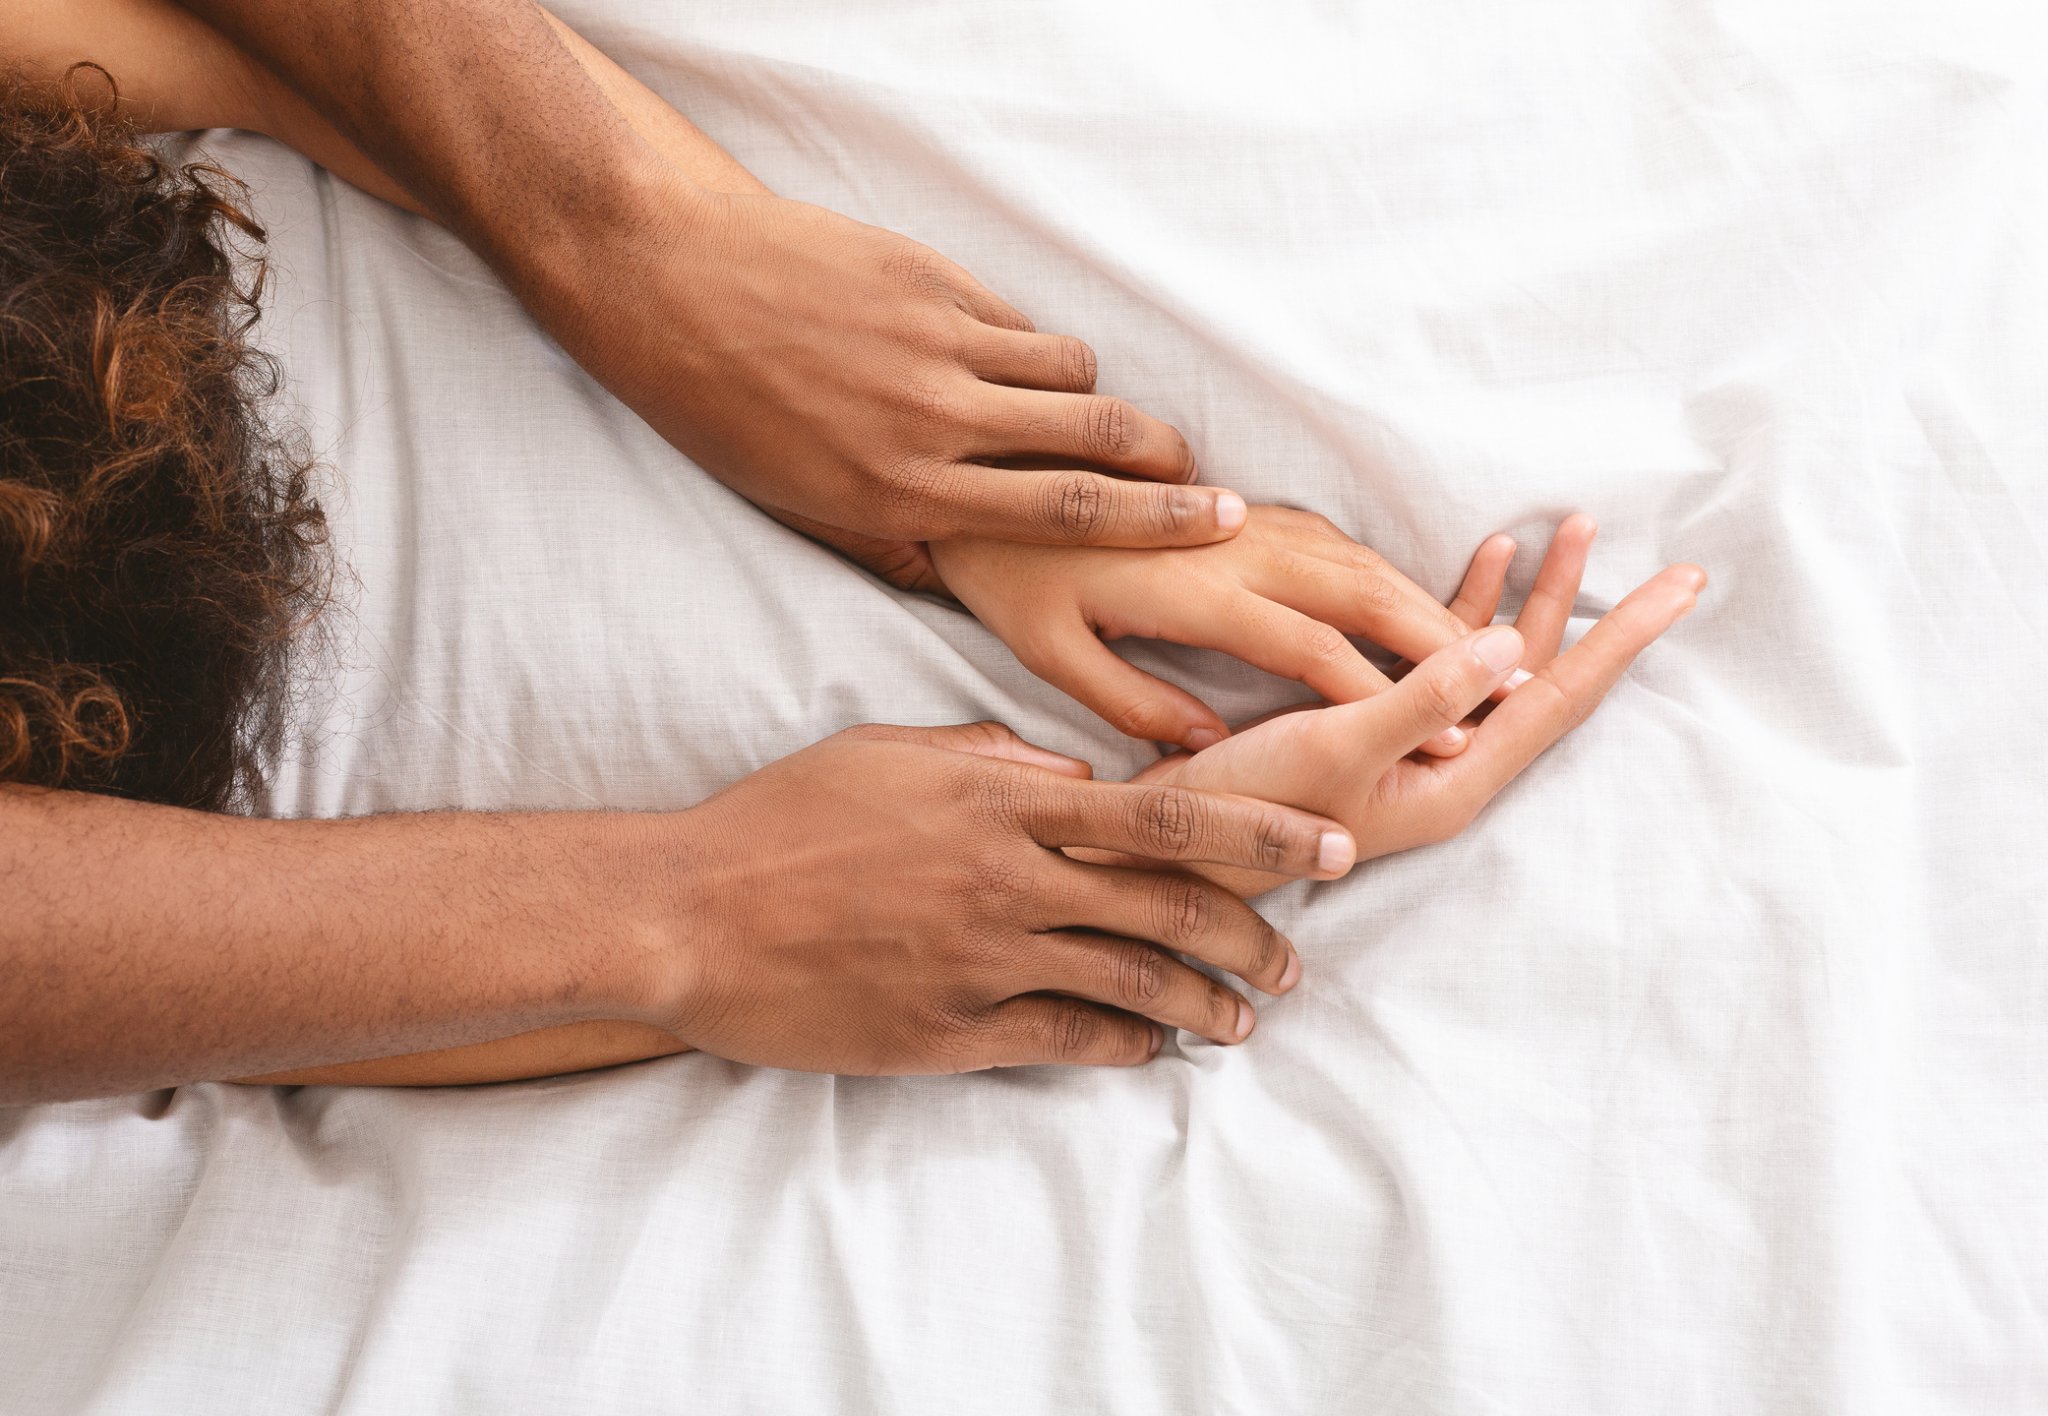 Spice things up in the bedroom with these underrated positions